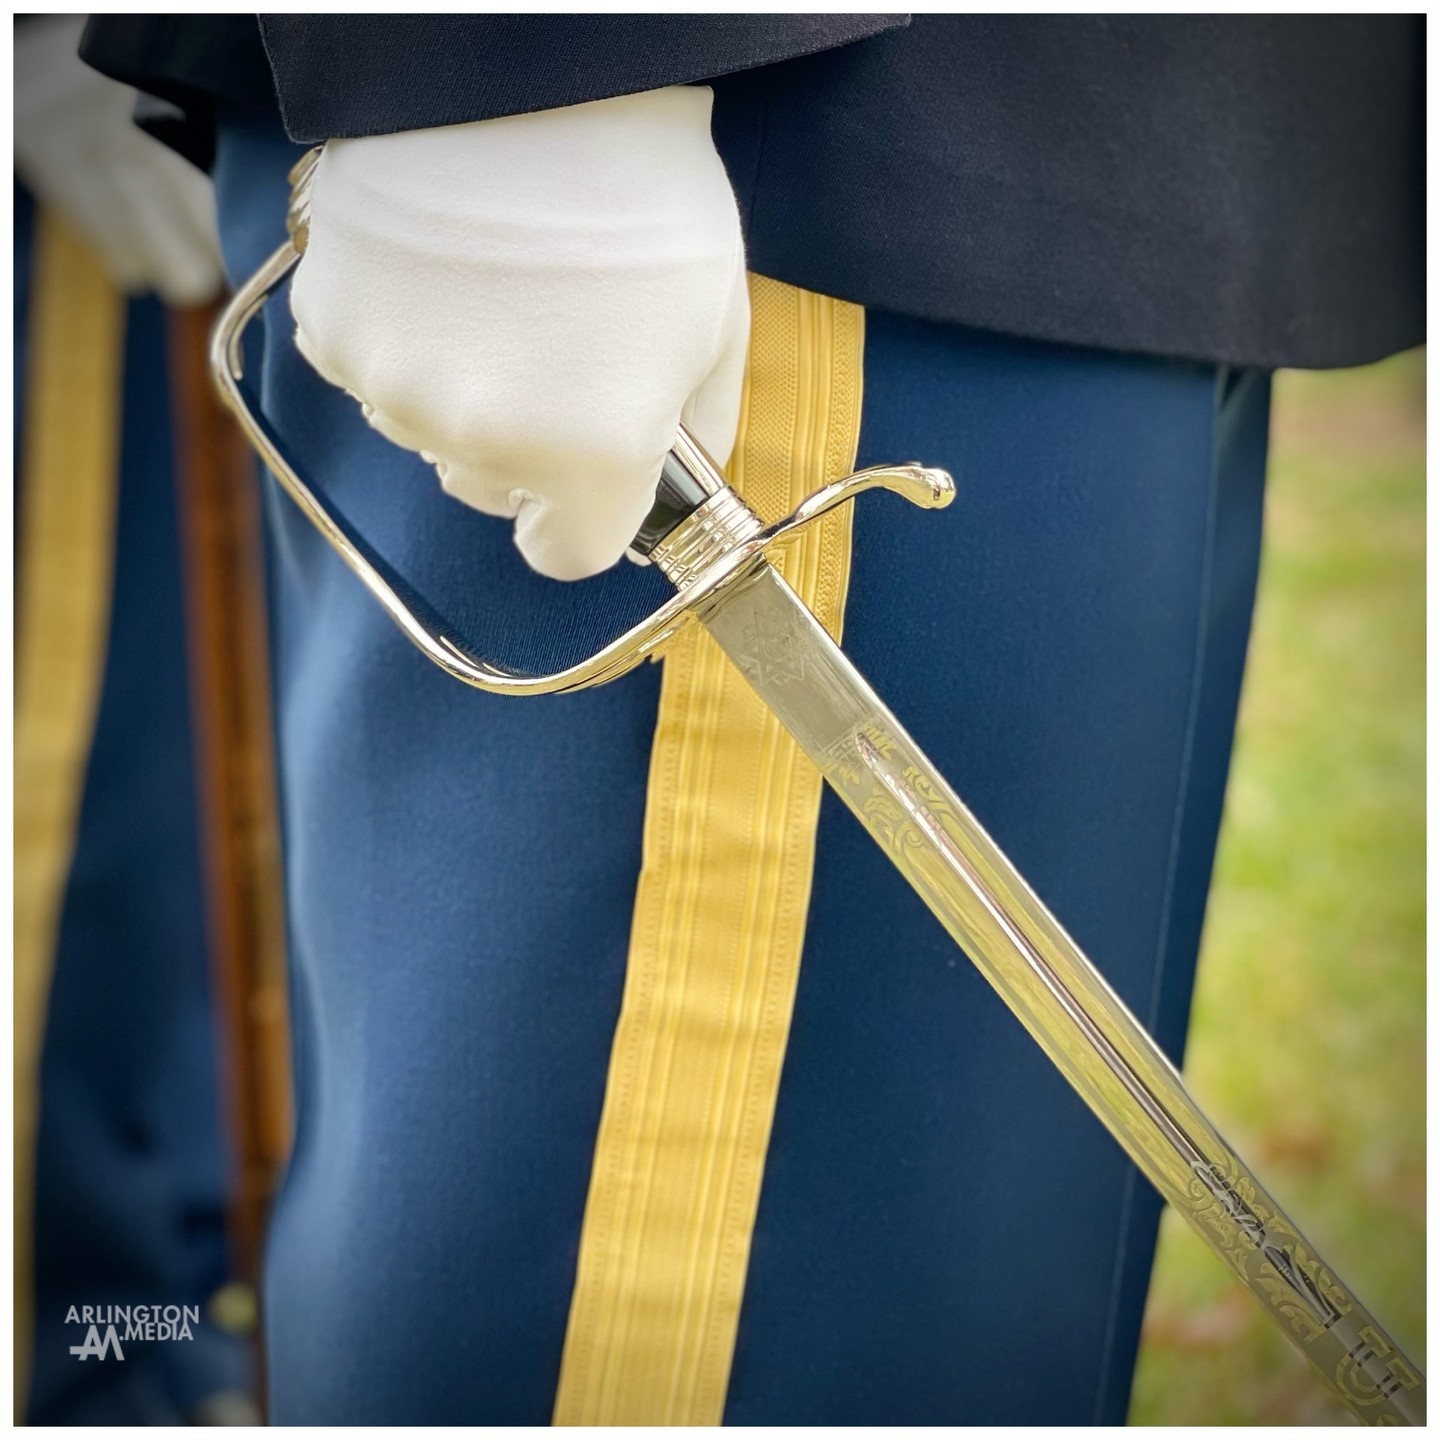 A member of the 1st Battalion, 3d US Infantry Regiment (The Old Guard) holds his saber during a US Army service in Arlington National Cemetery.

Officers arriving to The Old Guard spend weeks training and practicing as part of their initial tasking to the unit.  They learn how to execute formations, movements, and standard ceremonial procedures that are part of Dependent, Standard Honors, and Full Honors services at Arlington. 

Learning proper saber positioning and movements is critical to an individual soldier and his or her platoon being cemetery ready to honor America's fallen heroes to the best of their abilities.